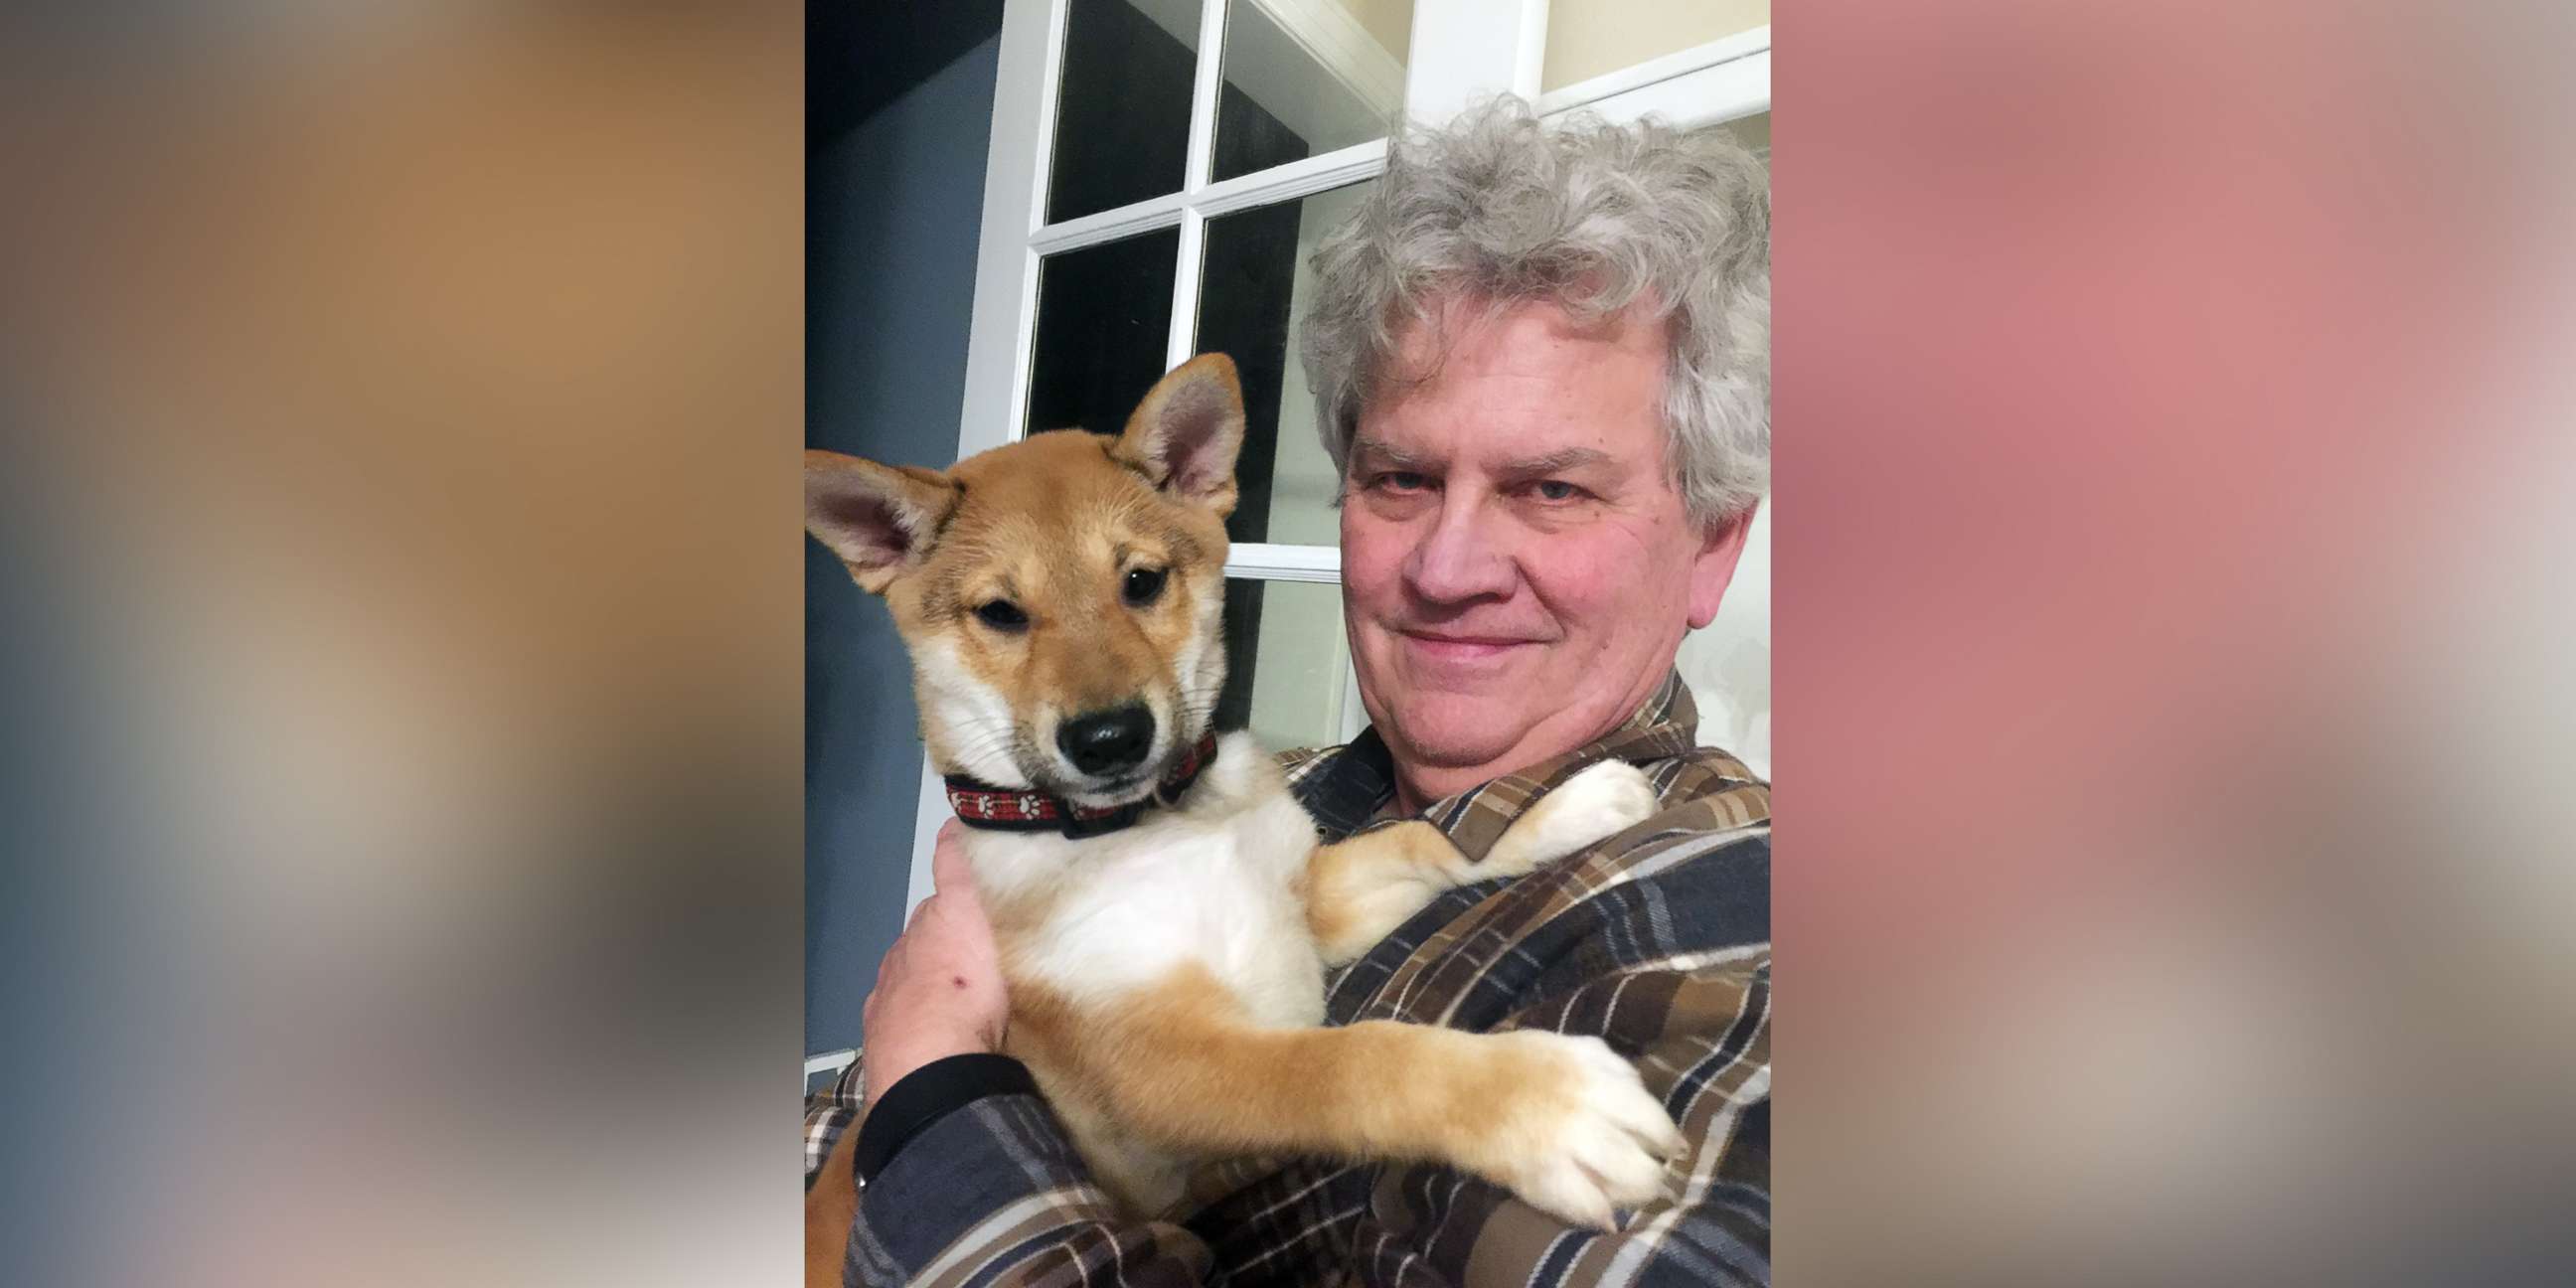 PHOTO: Mike Krueger holds his puppy Taka in a 2019 photo. Krueger and his wife Olga, of Morrison, Ill., only had Taka for a few days before the dog died from parvovirus.